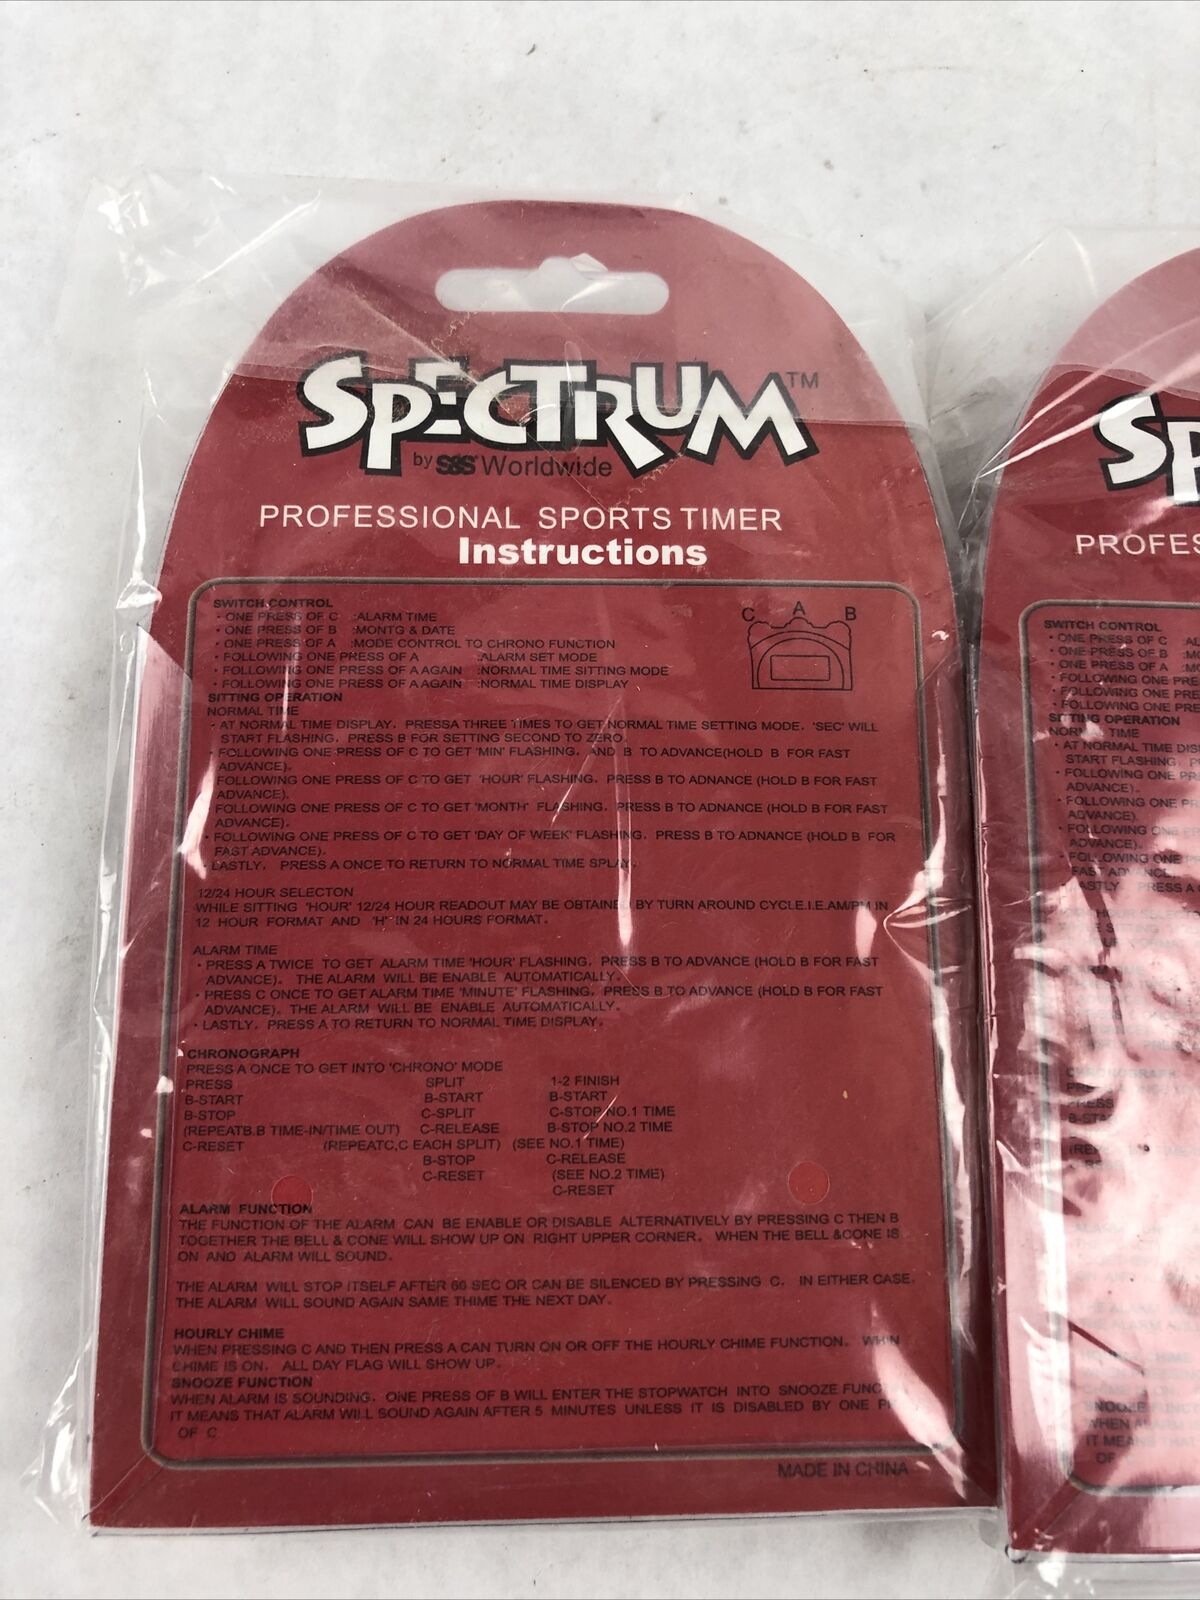 Spectrum W7526 Lot of 3 Stopwatches (1 Red & 2 Purple)